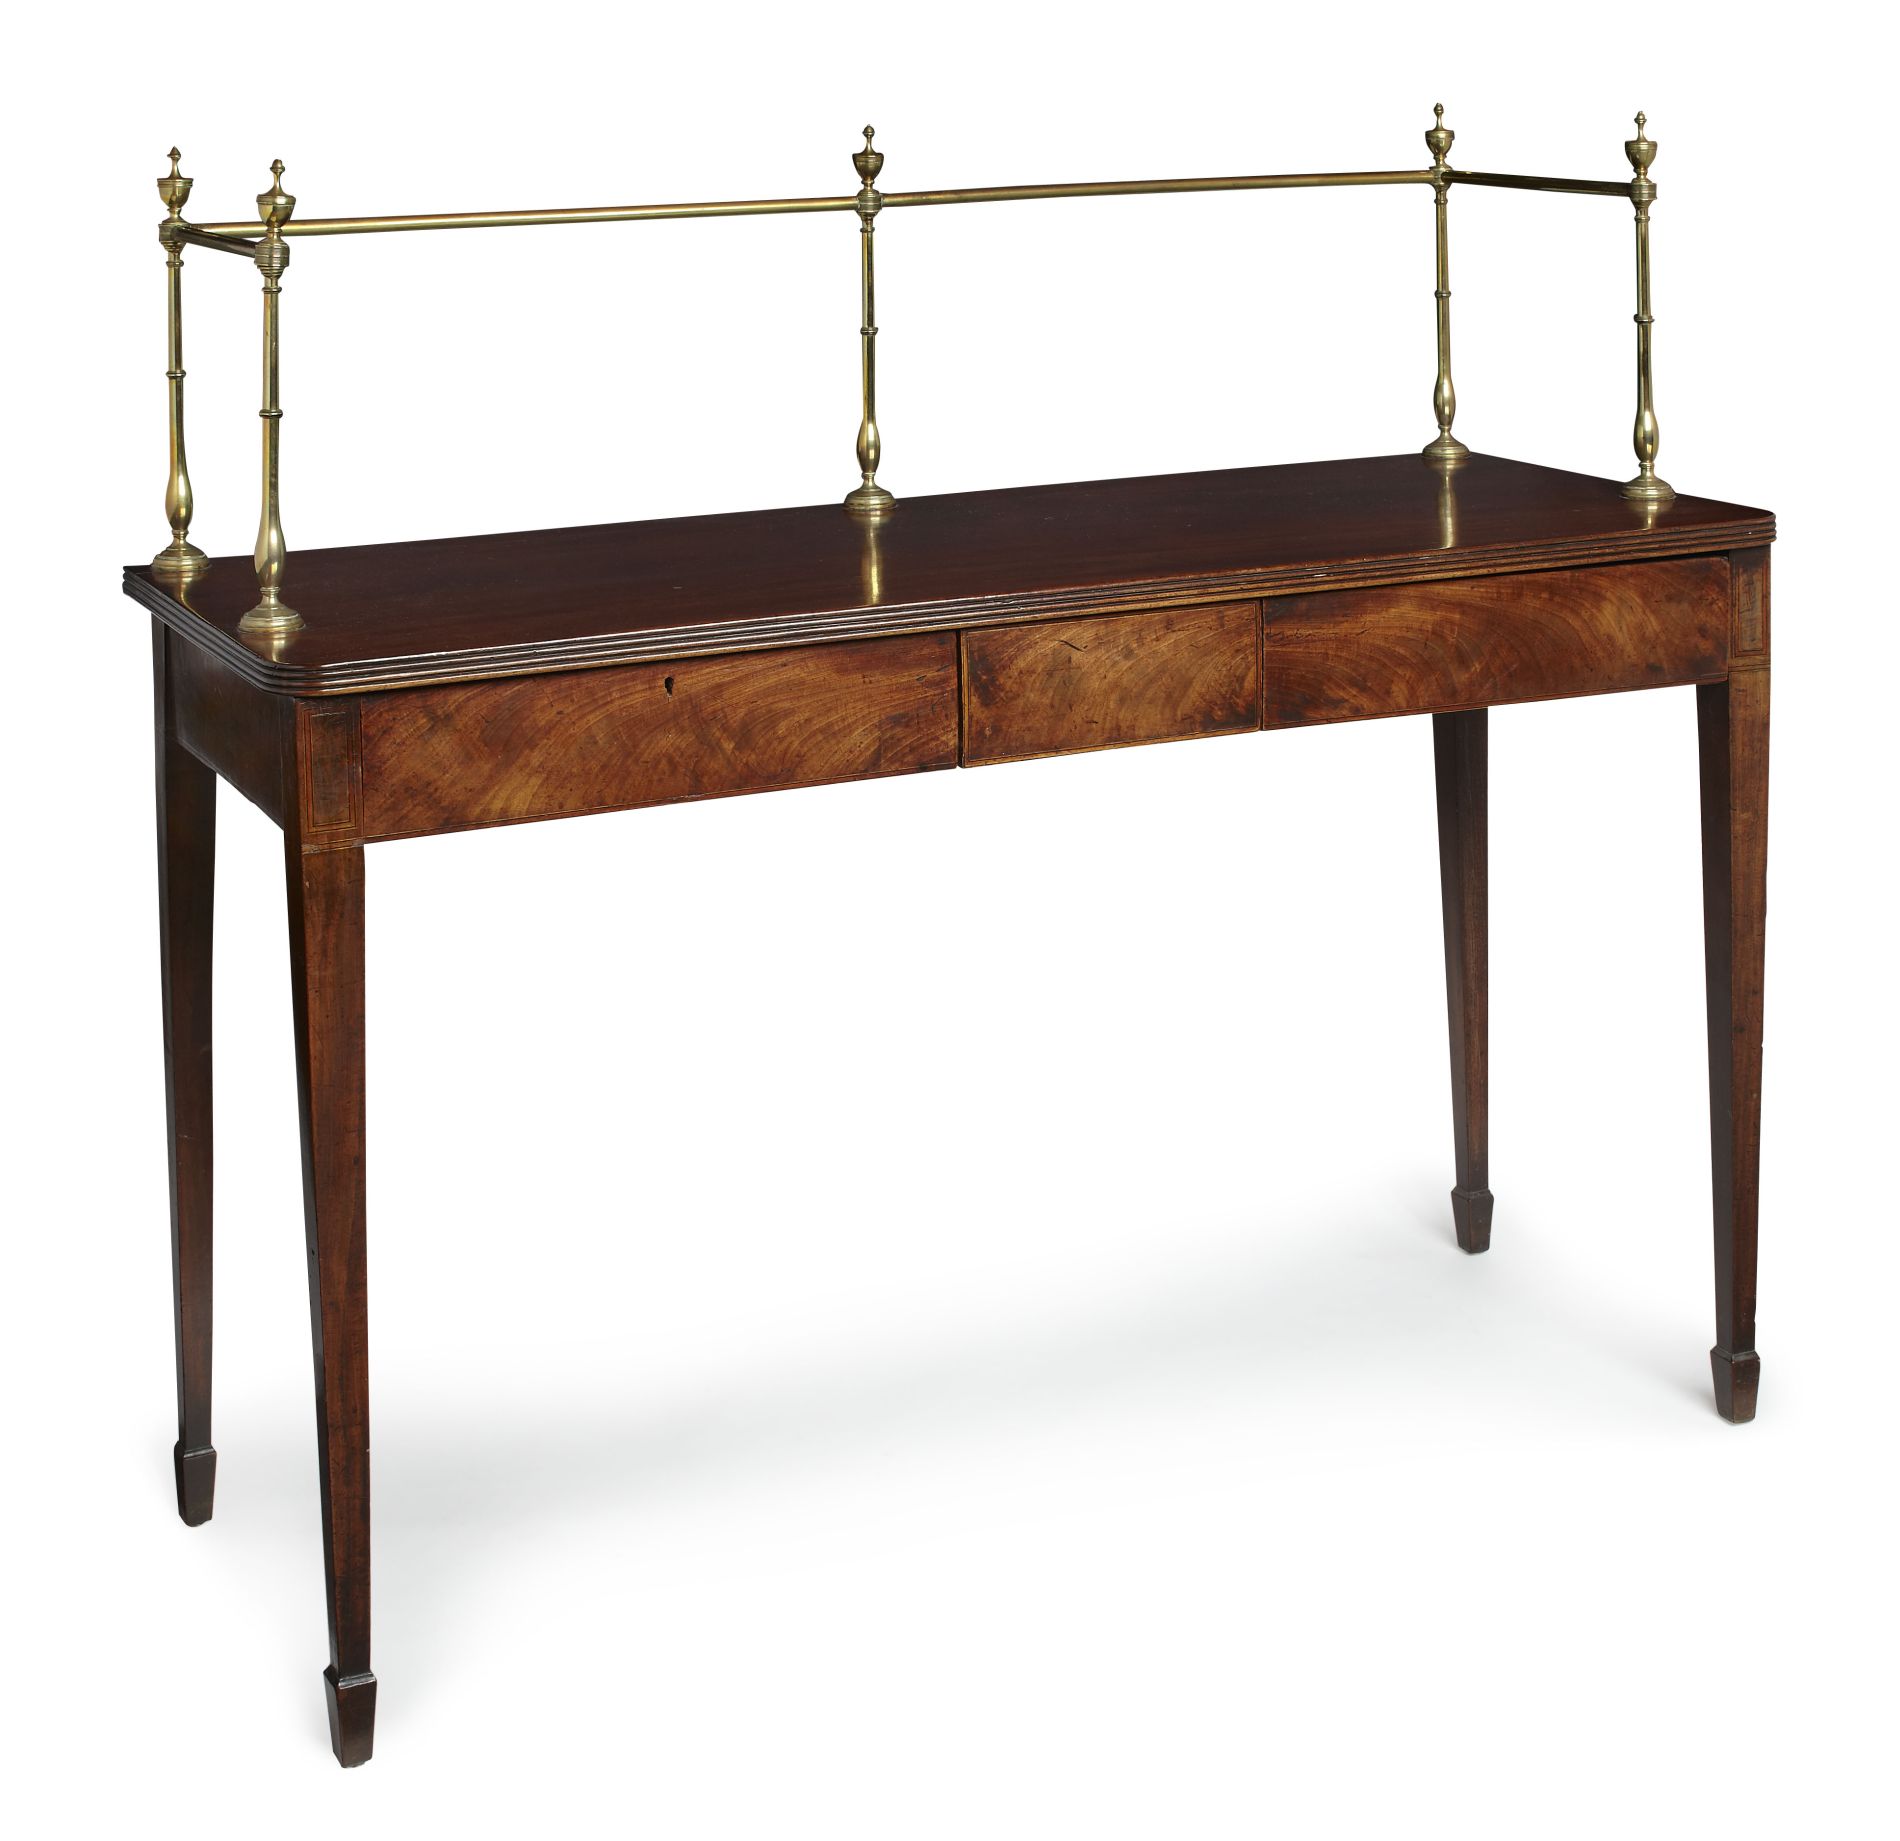 GEORGE III MAHOGANY AND INLAID SERVING TABLE CIRCA 1790 the rounded rectangular top with a reeded